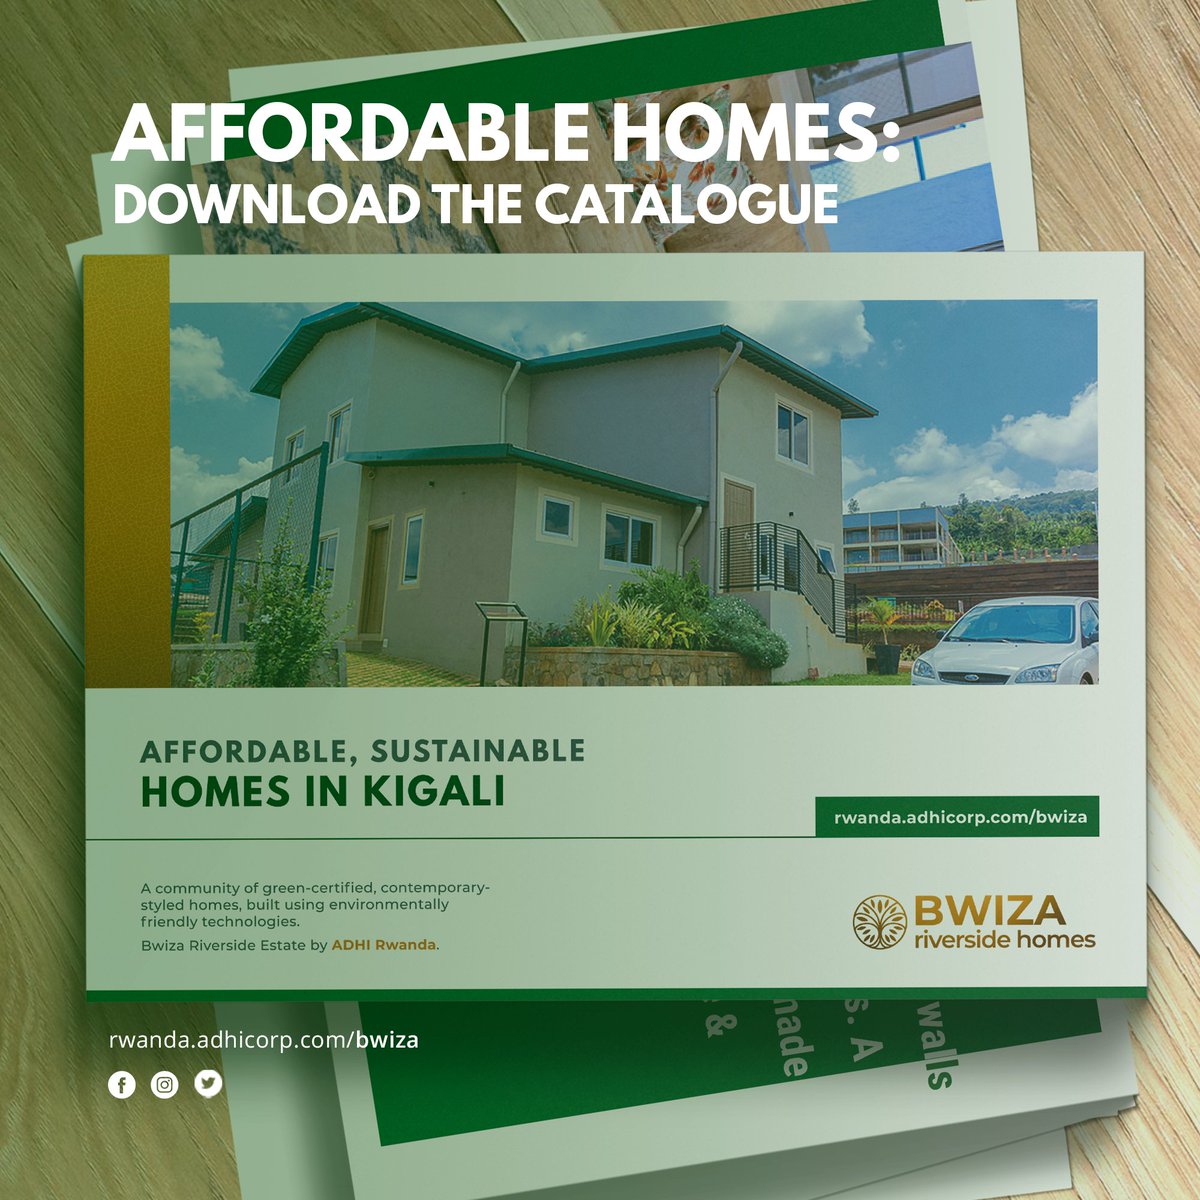 LEARN MORE about the Bwiza Riverside Affordable Homes: rwanda.adhicorp.com/wp-content/upl…
🌳🏠🌳
#bwizariverside #affordablehomes #rwanda #kigali #construction #innovation #lightsteelframe #homesforafricanclimate #buildaffordably #RwOT